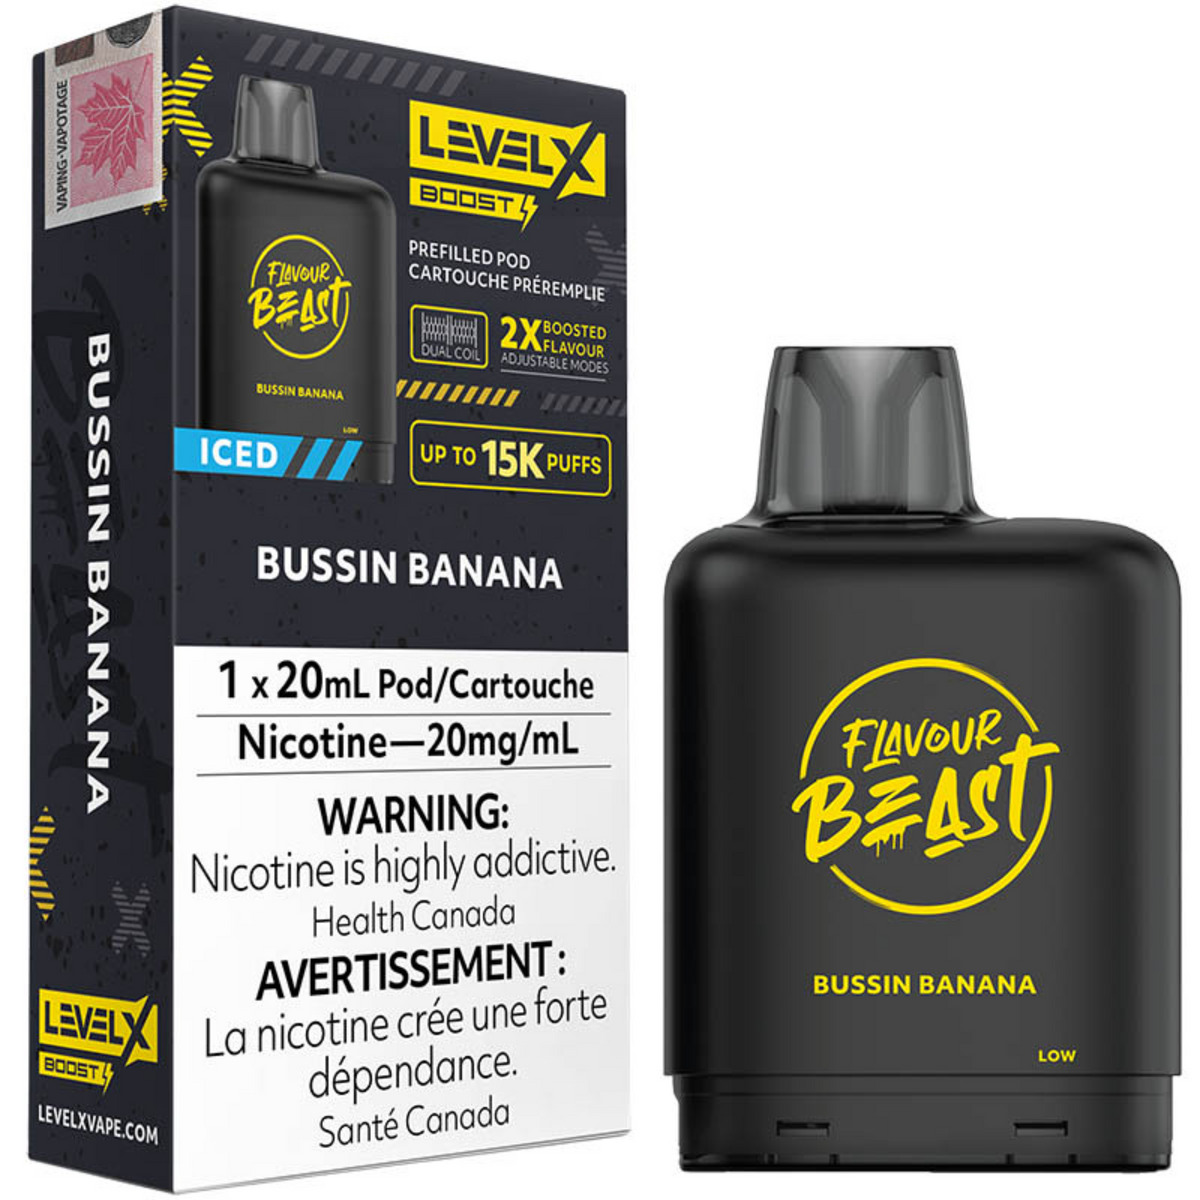 Level X Boost Pod - Flavour Beast:  Bussin Banana Iced